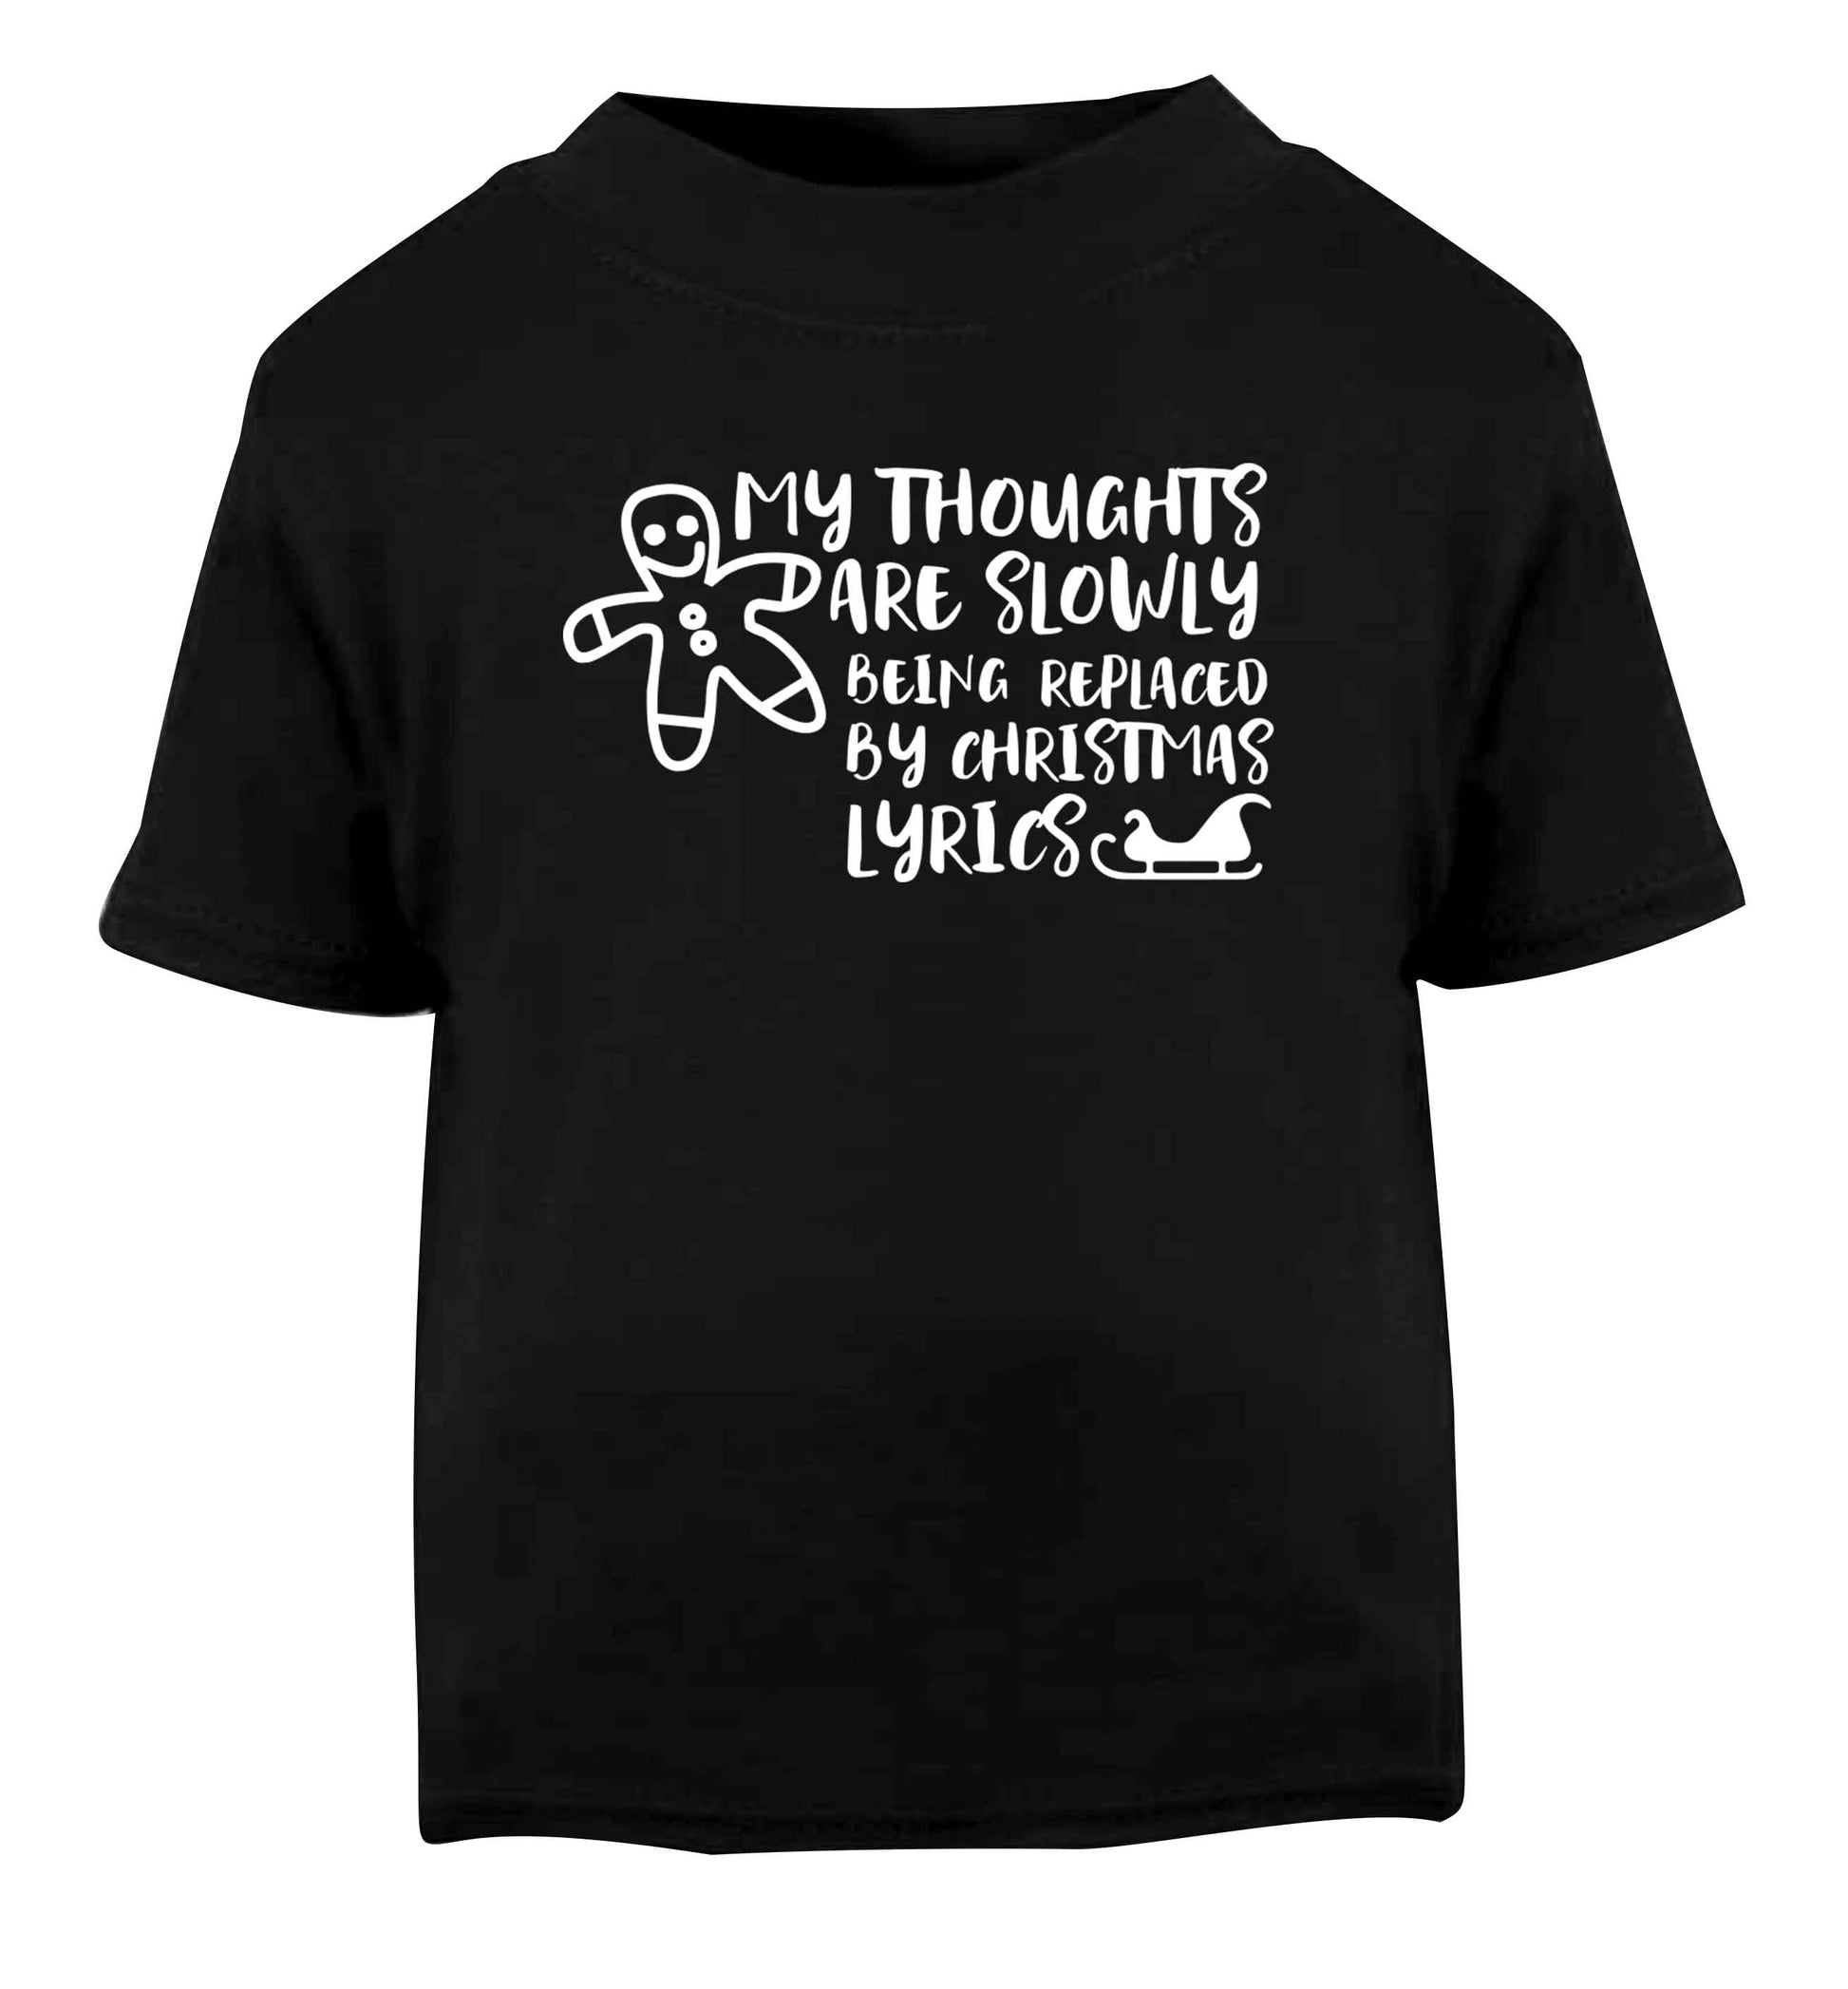 My thoughts are slowly being replaced by Christmas lyrics Black Baby Toddler Tshirt 2 years